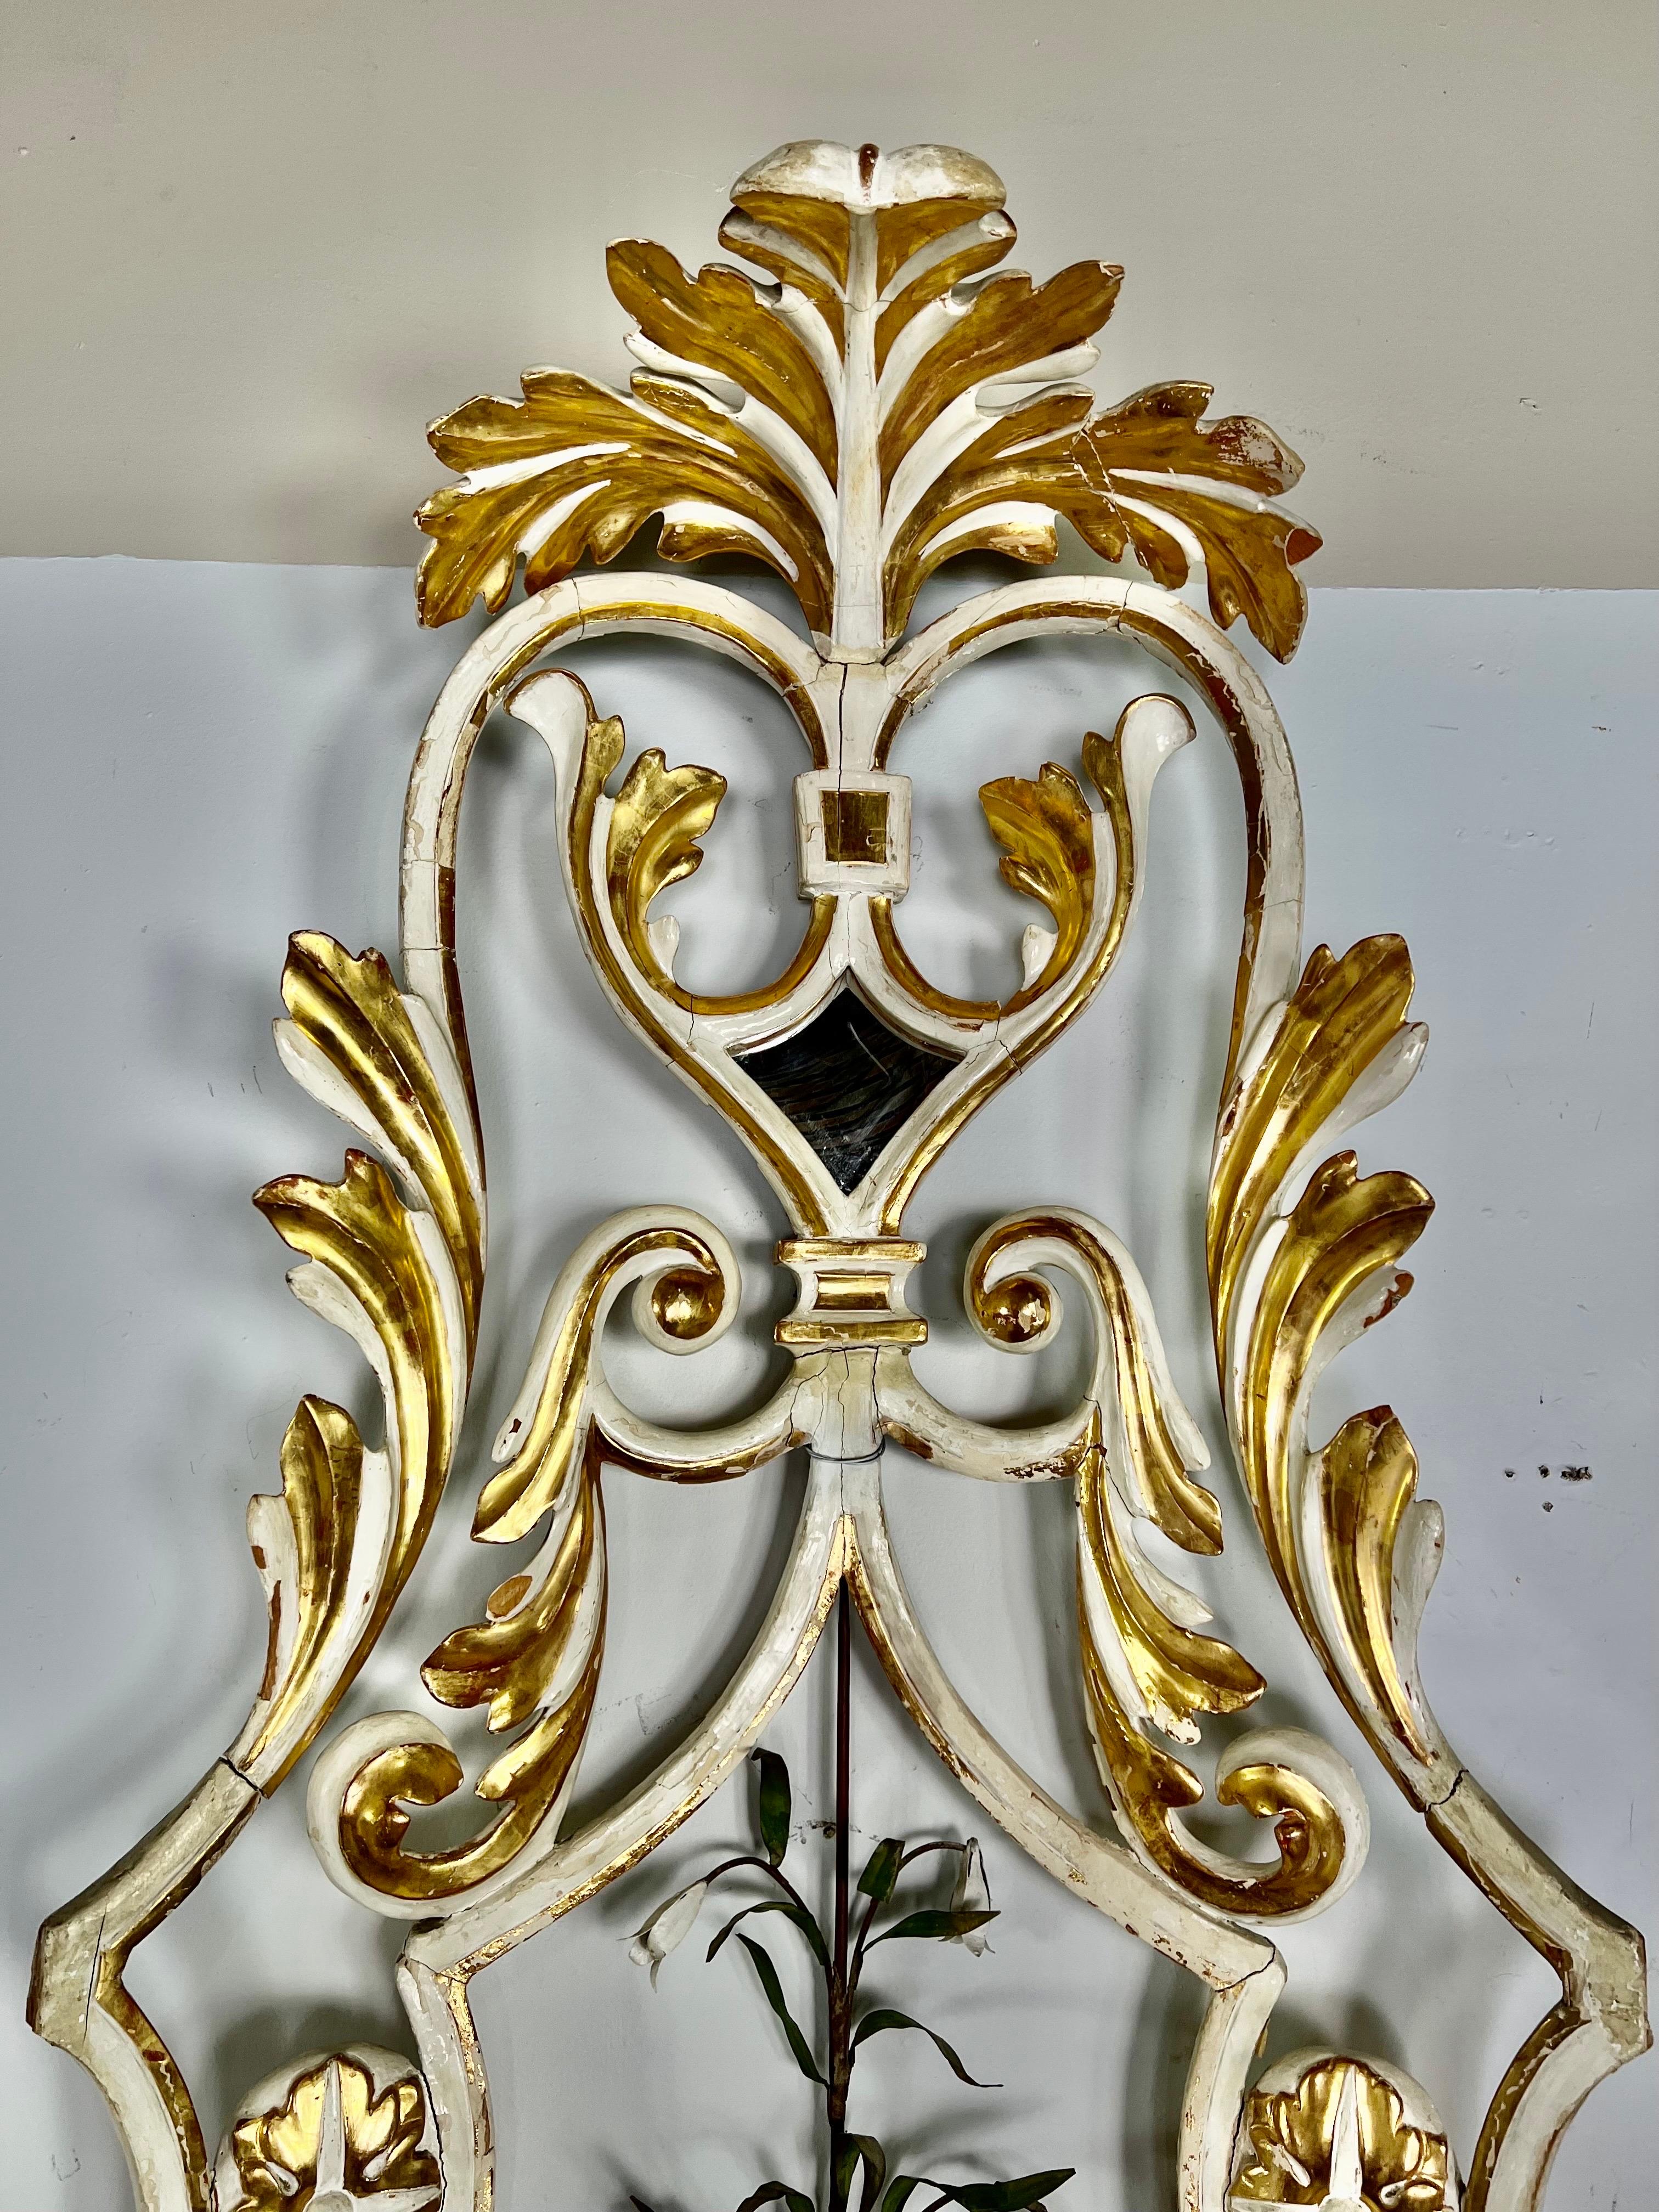 19th C. carved painted & parcel gilt architectural element. The piece is painted in antique white with 22K gold leaf details throughout. There is also a metal stem of flowers in the center of the element that can be removed and replaced with mirror